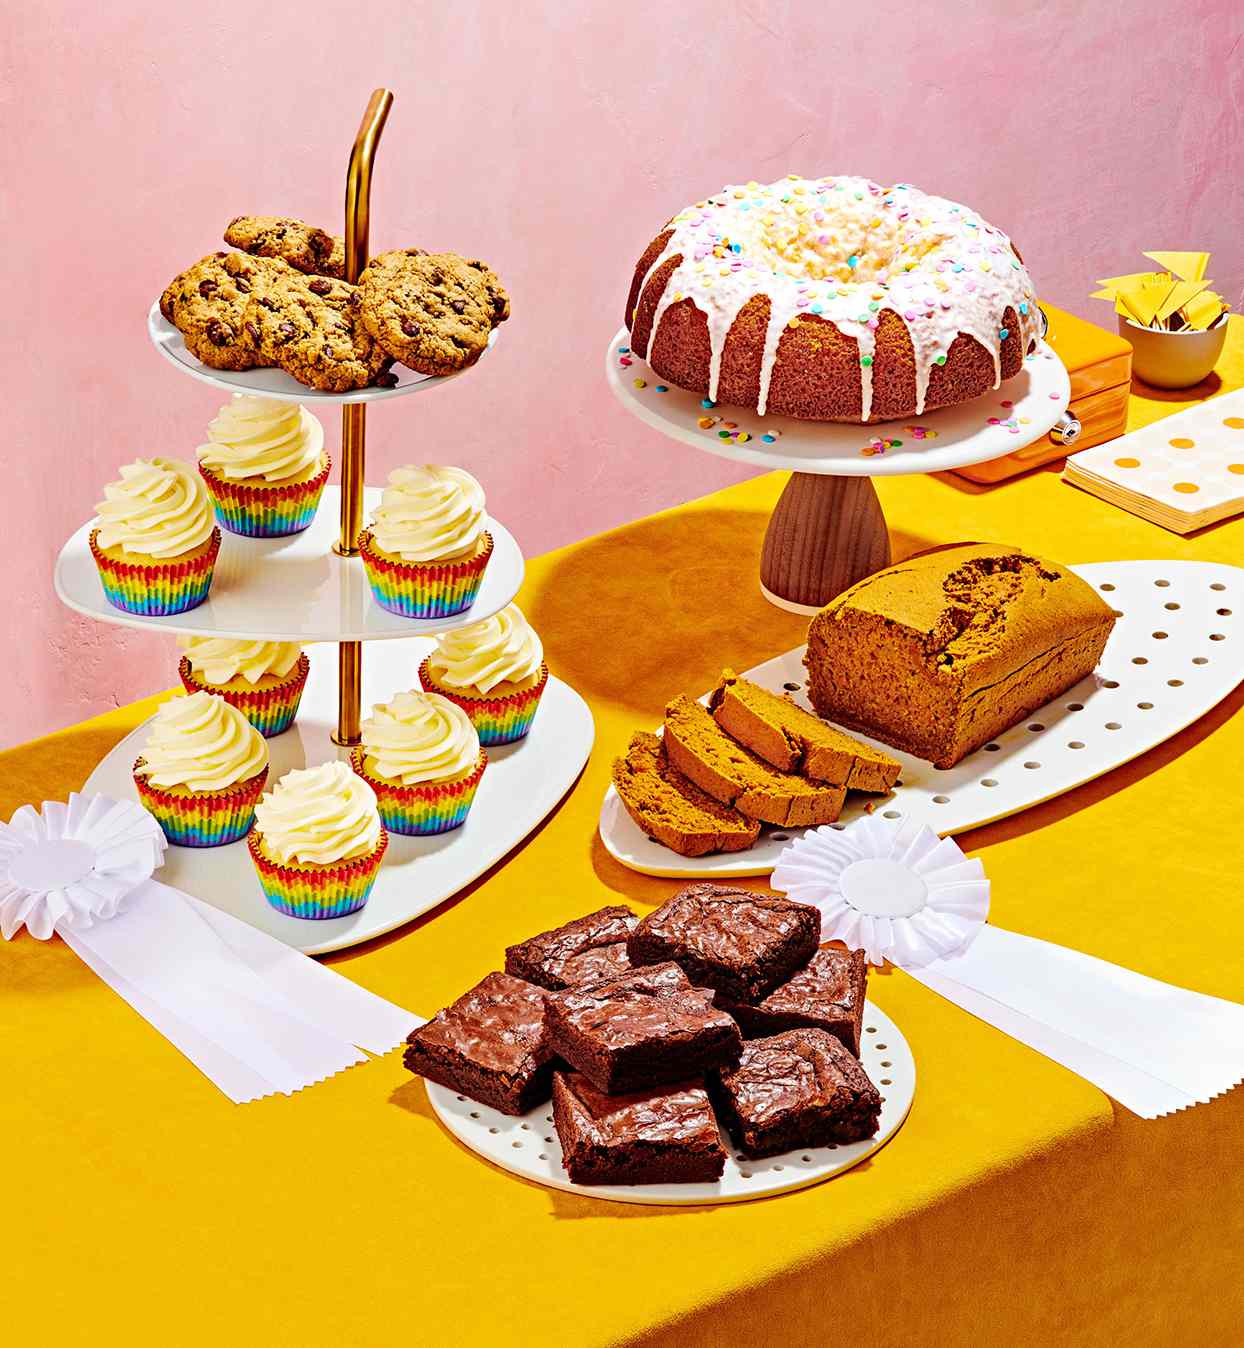 yellow table with various baked goods on display